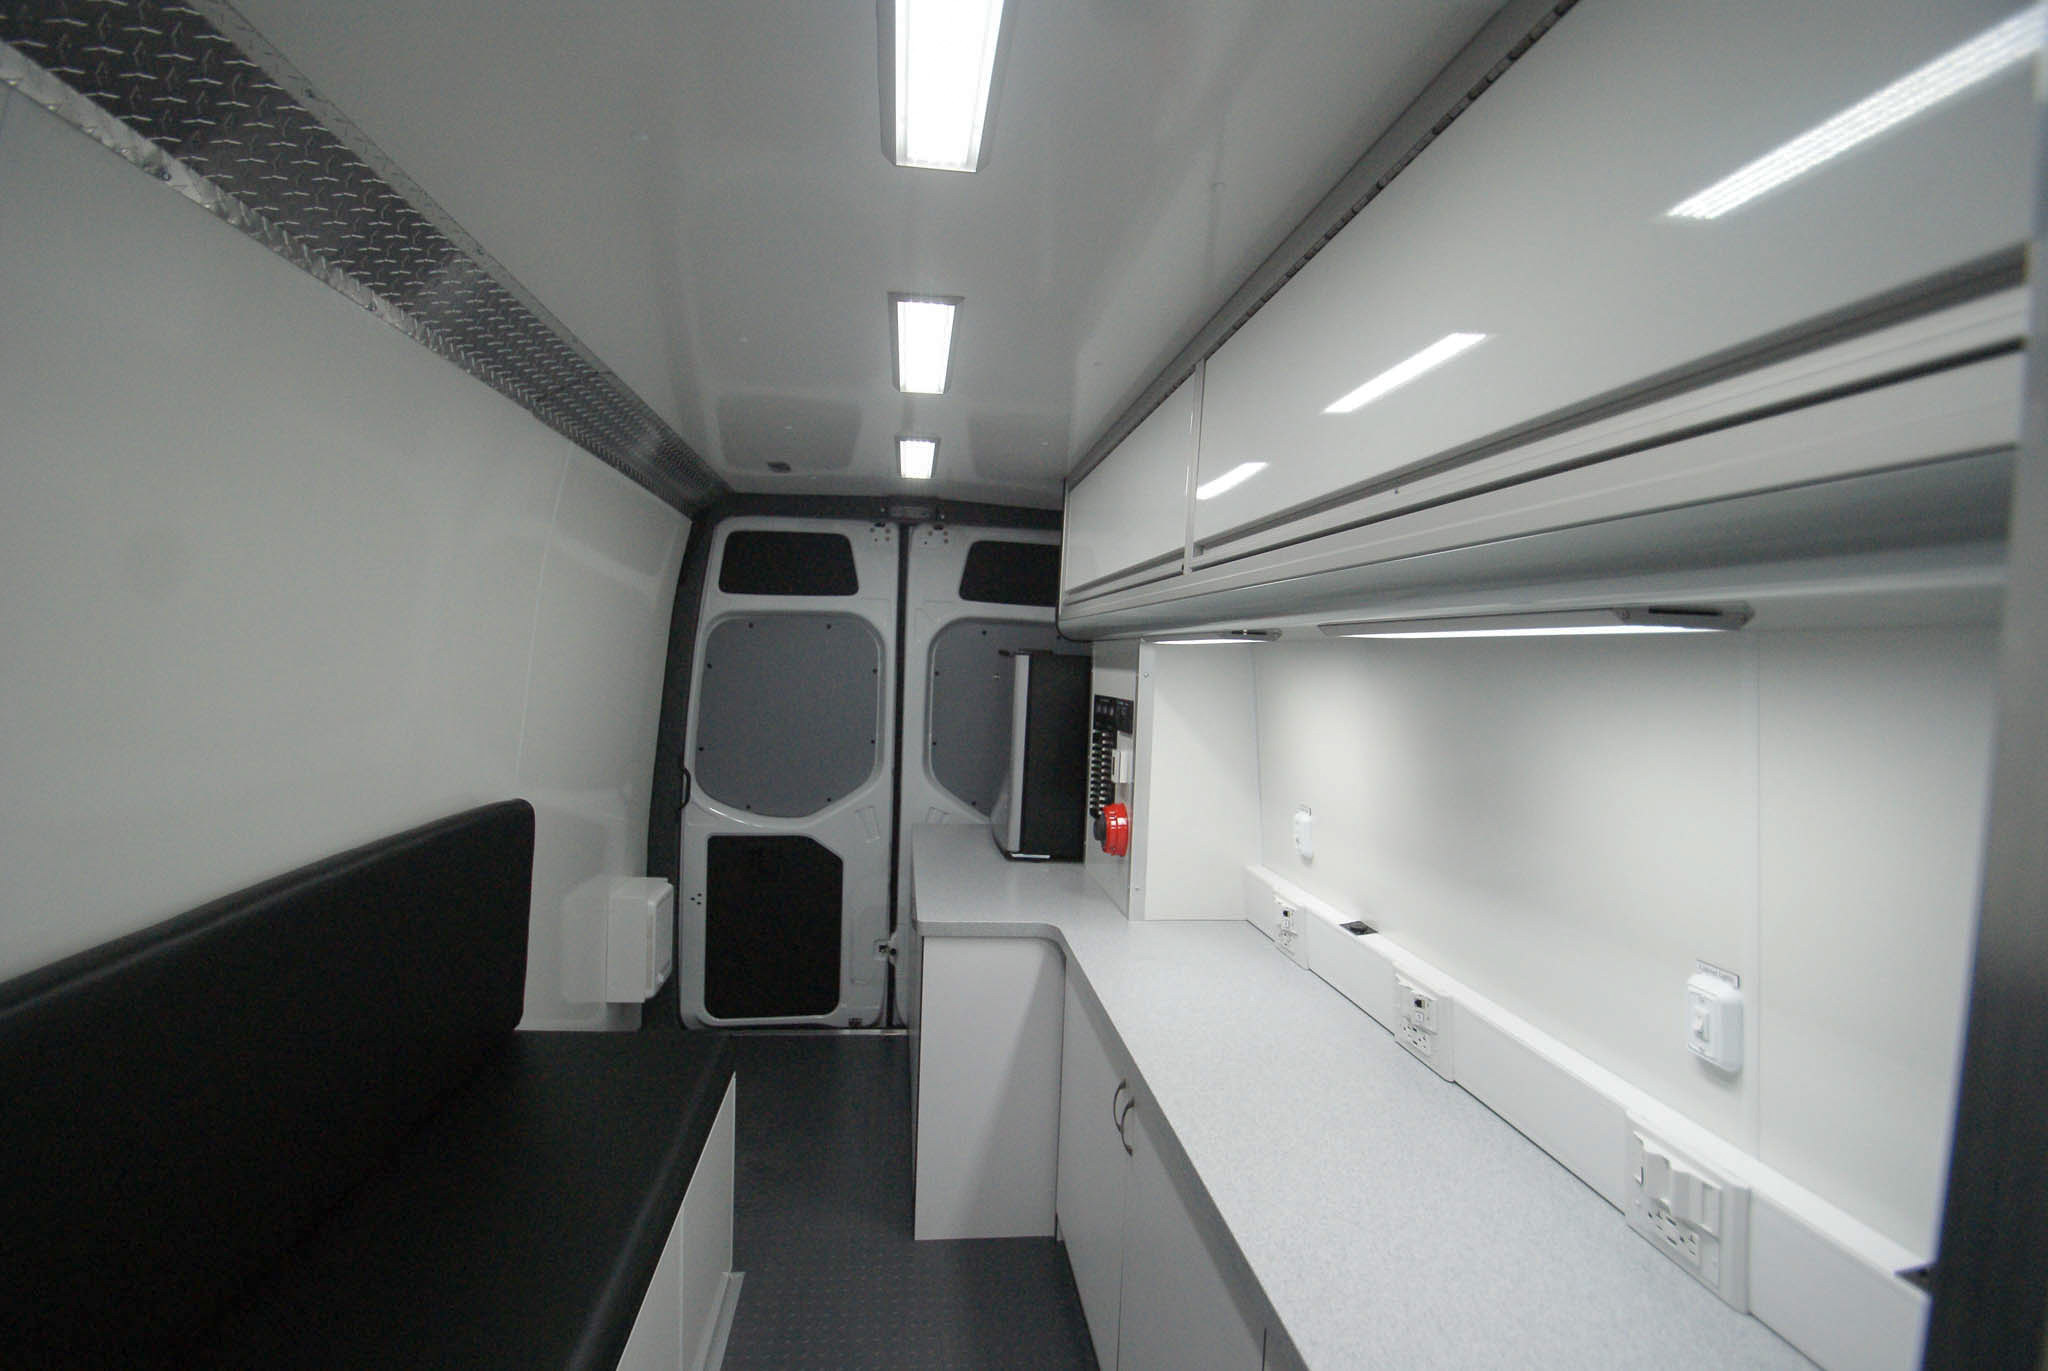 Direct view of the Mobile Outreach sprinter van's back room as seen from the waiting area.